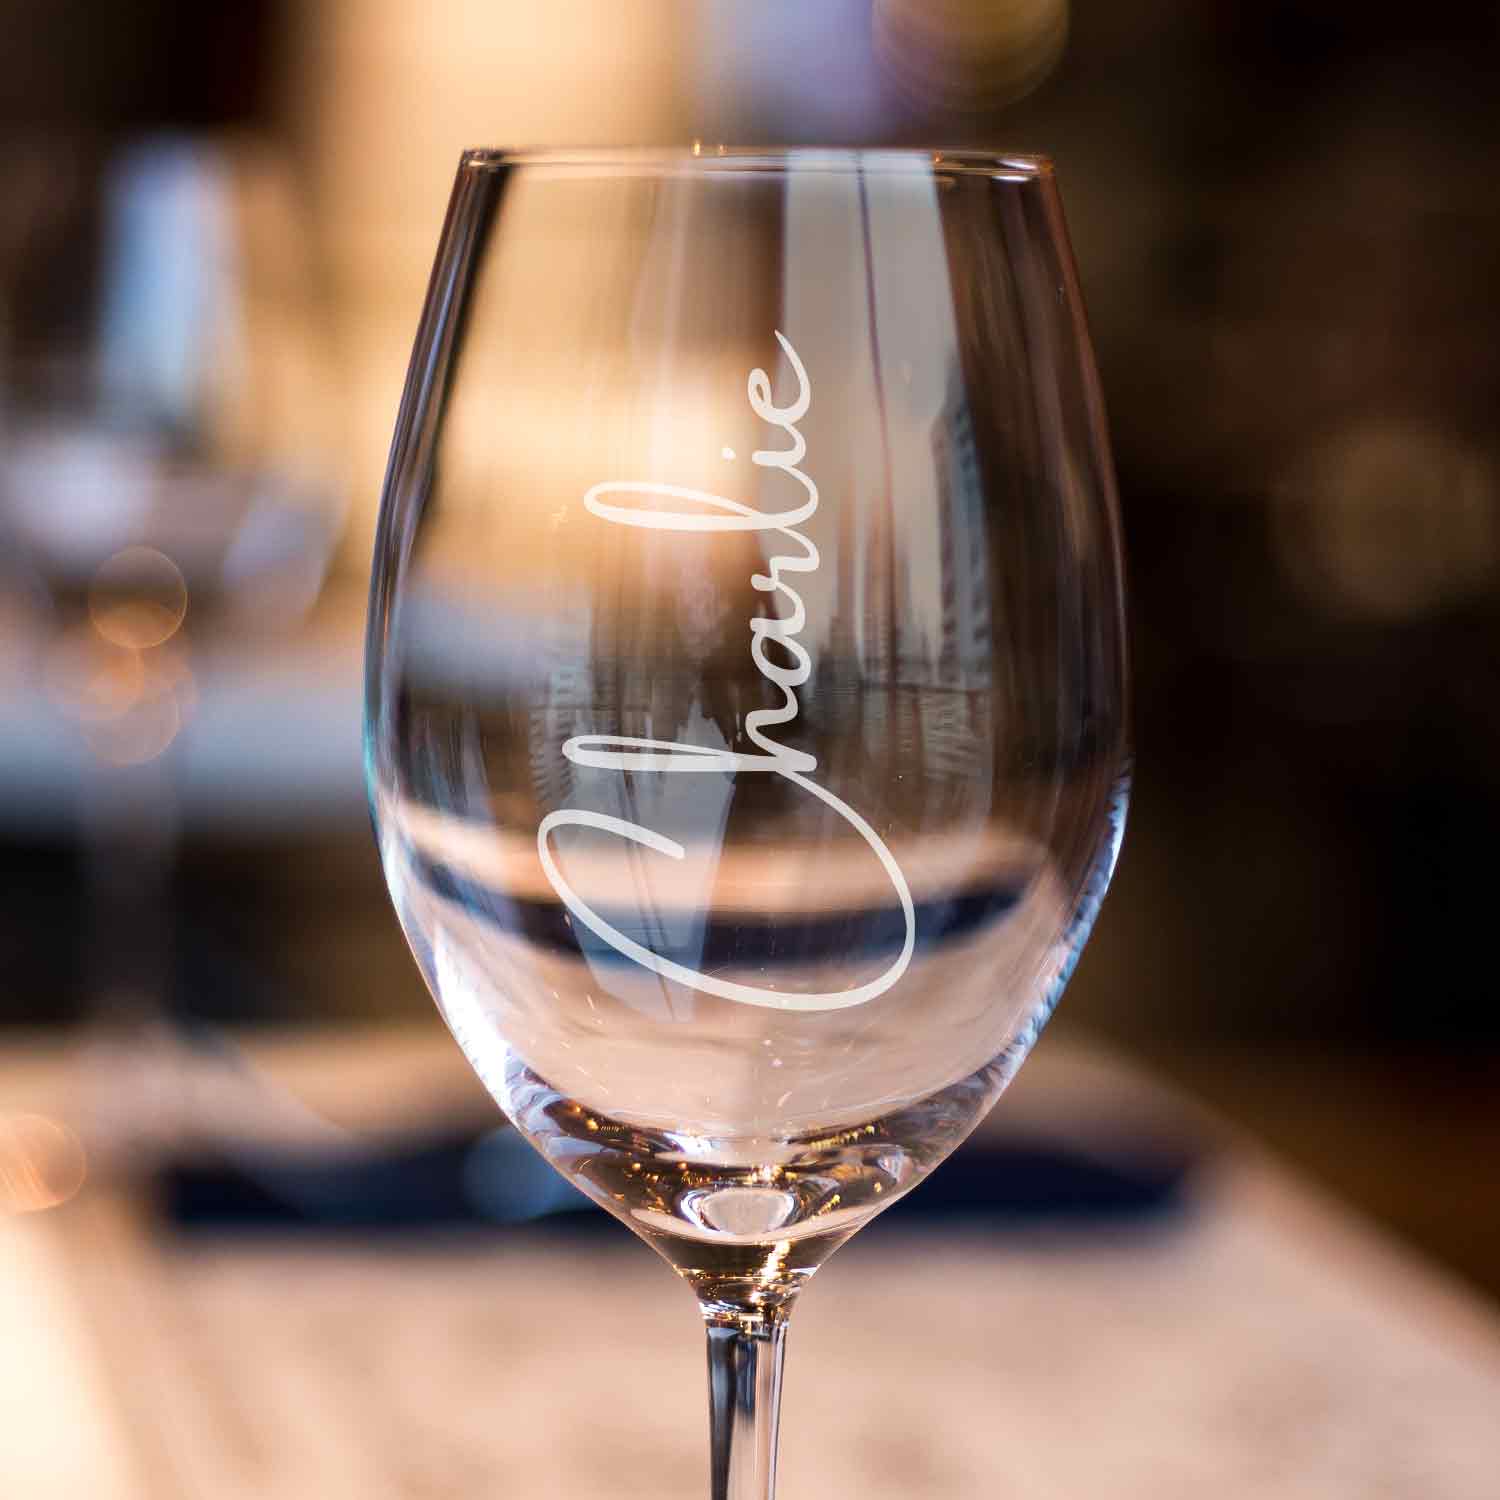 name engraved wine glass